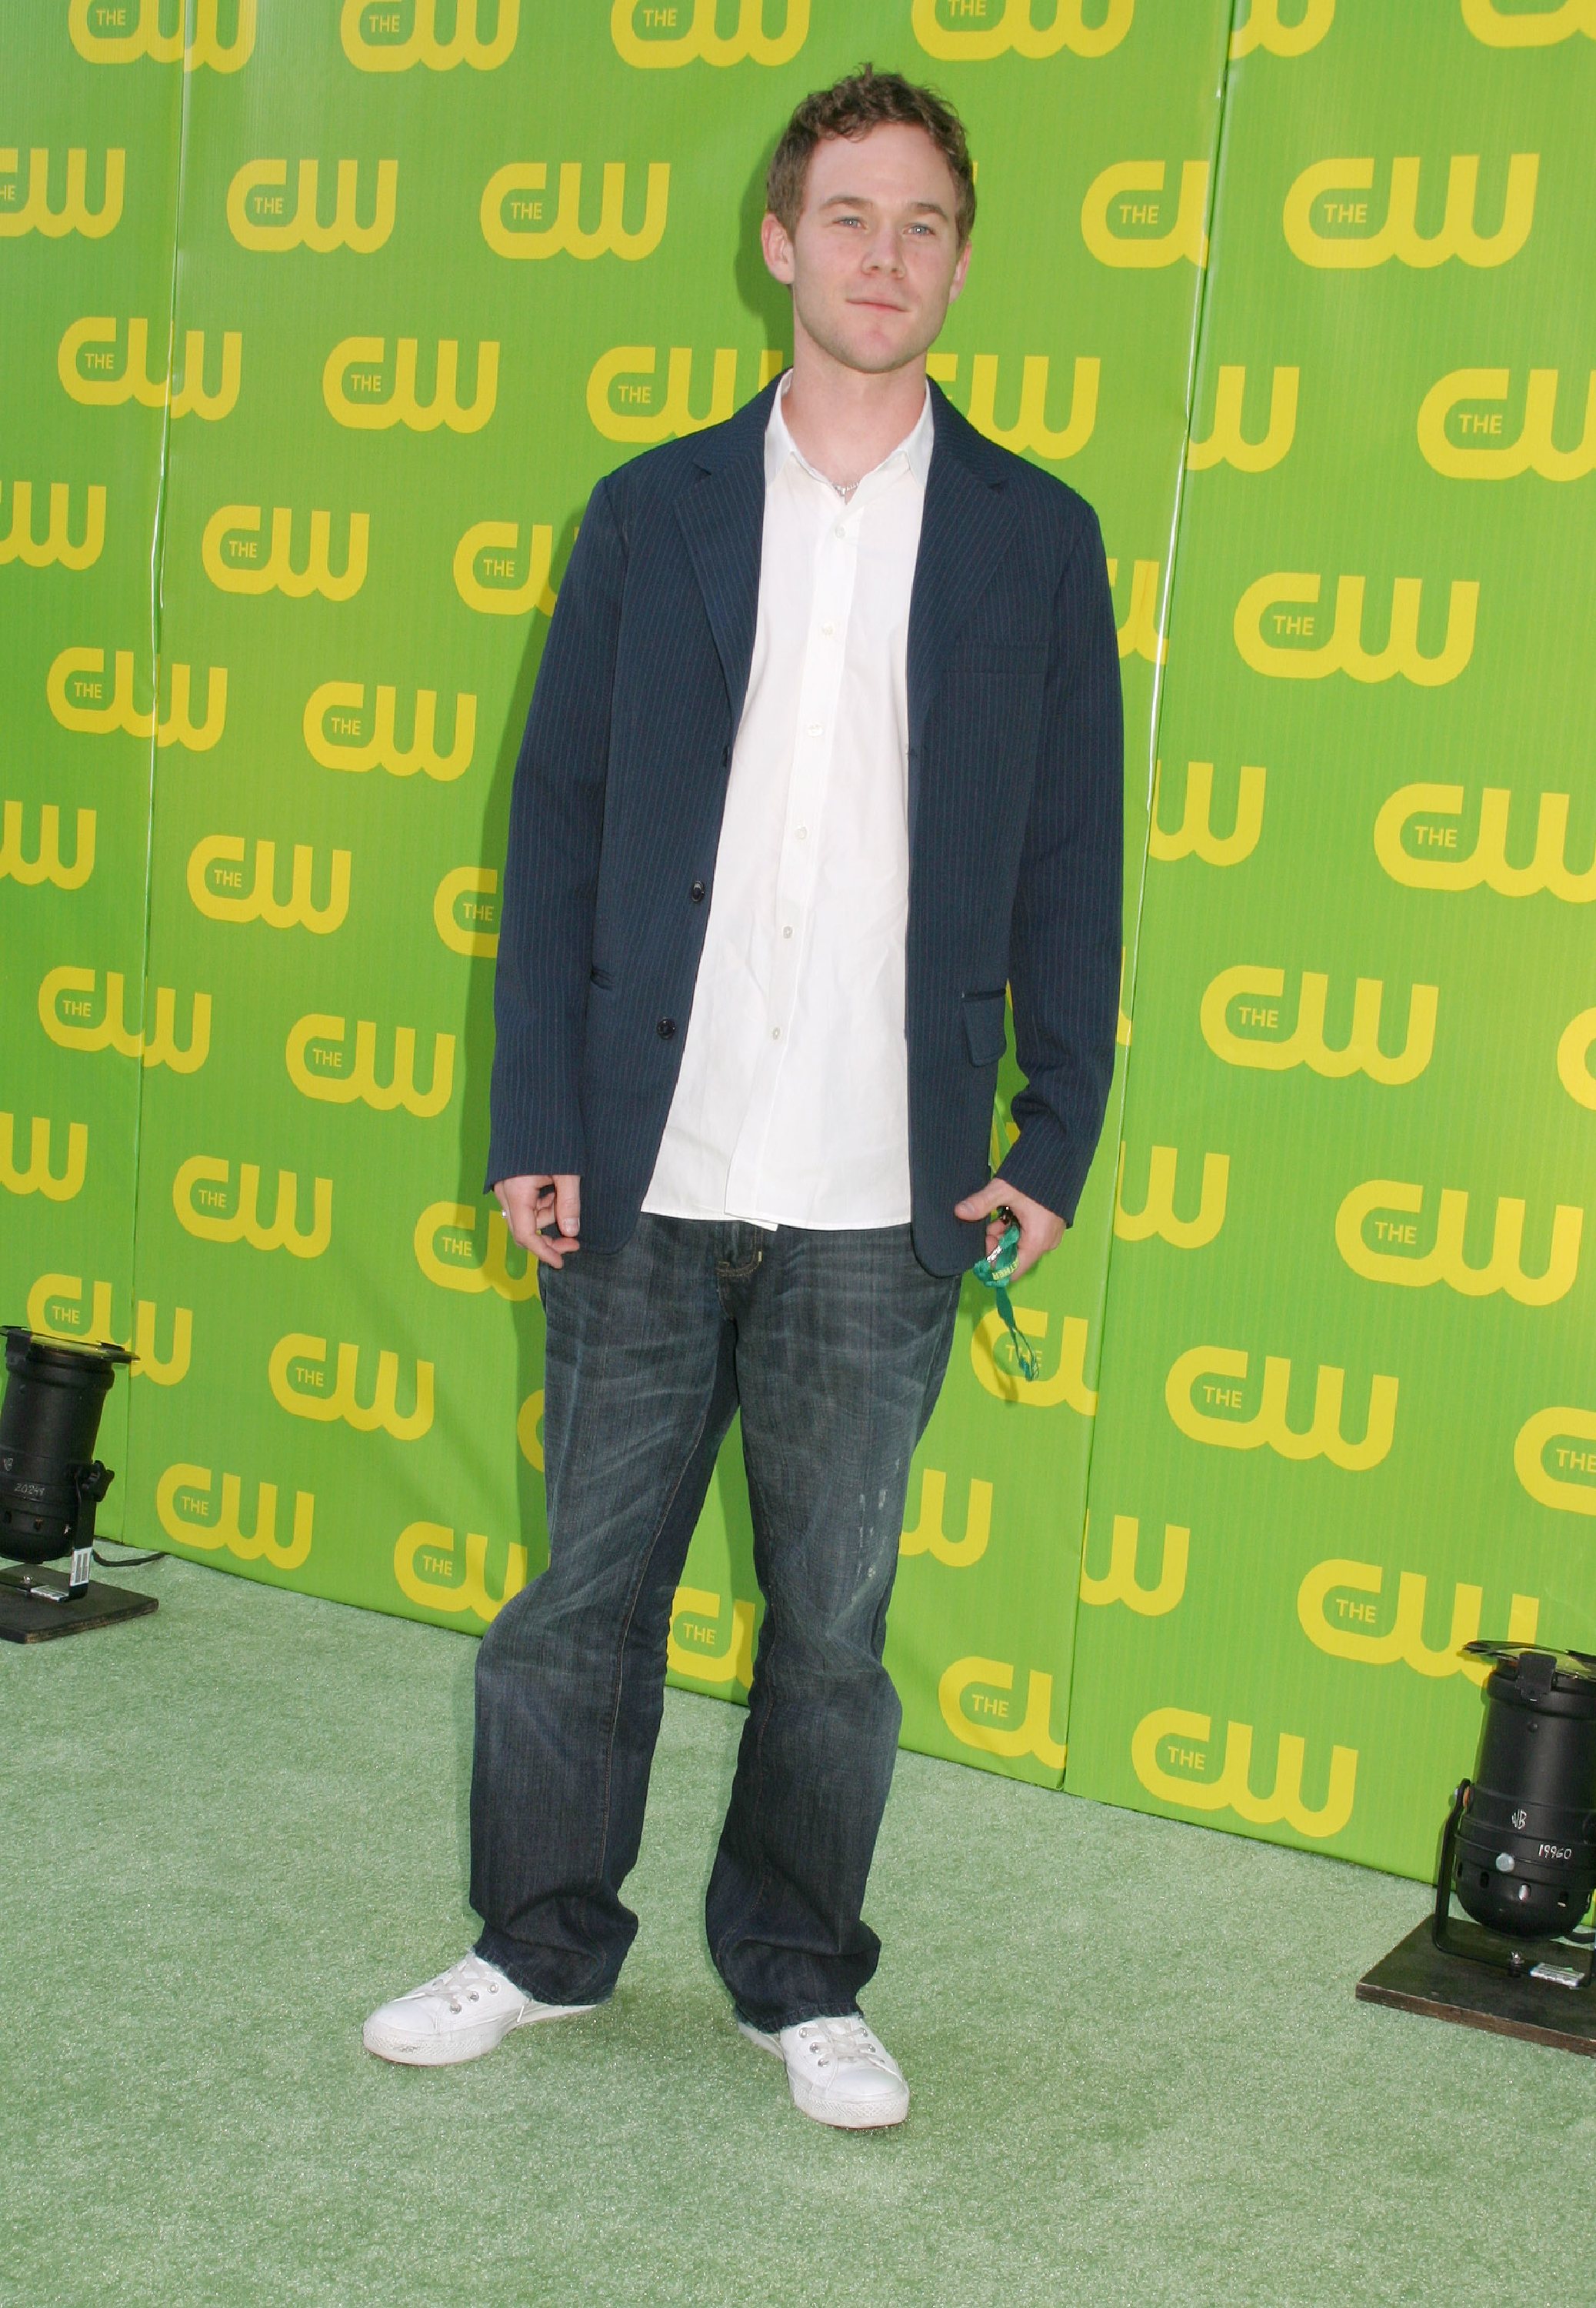 General photo of Aaron Ashmore